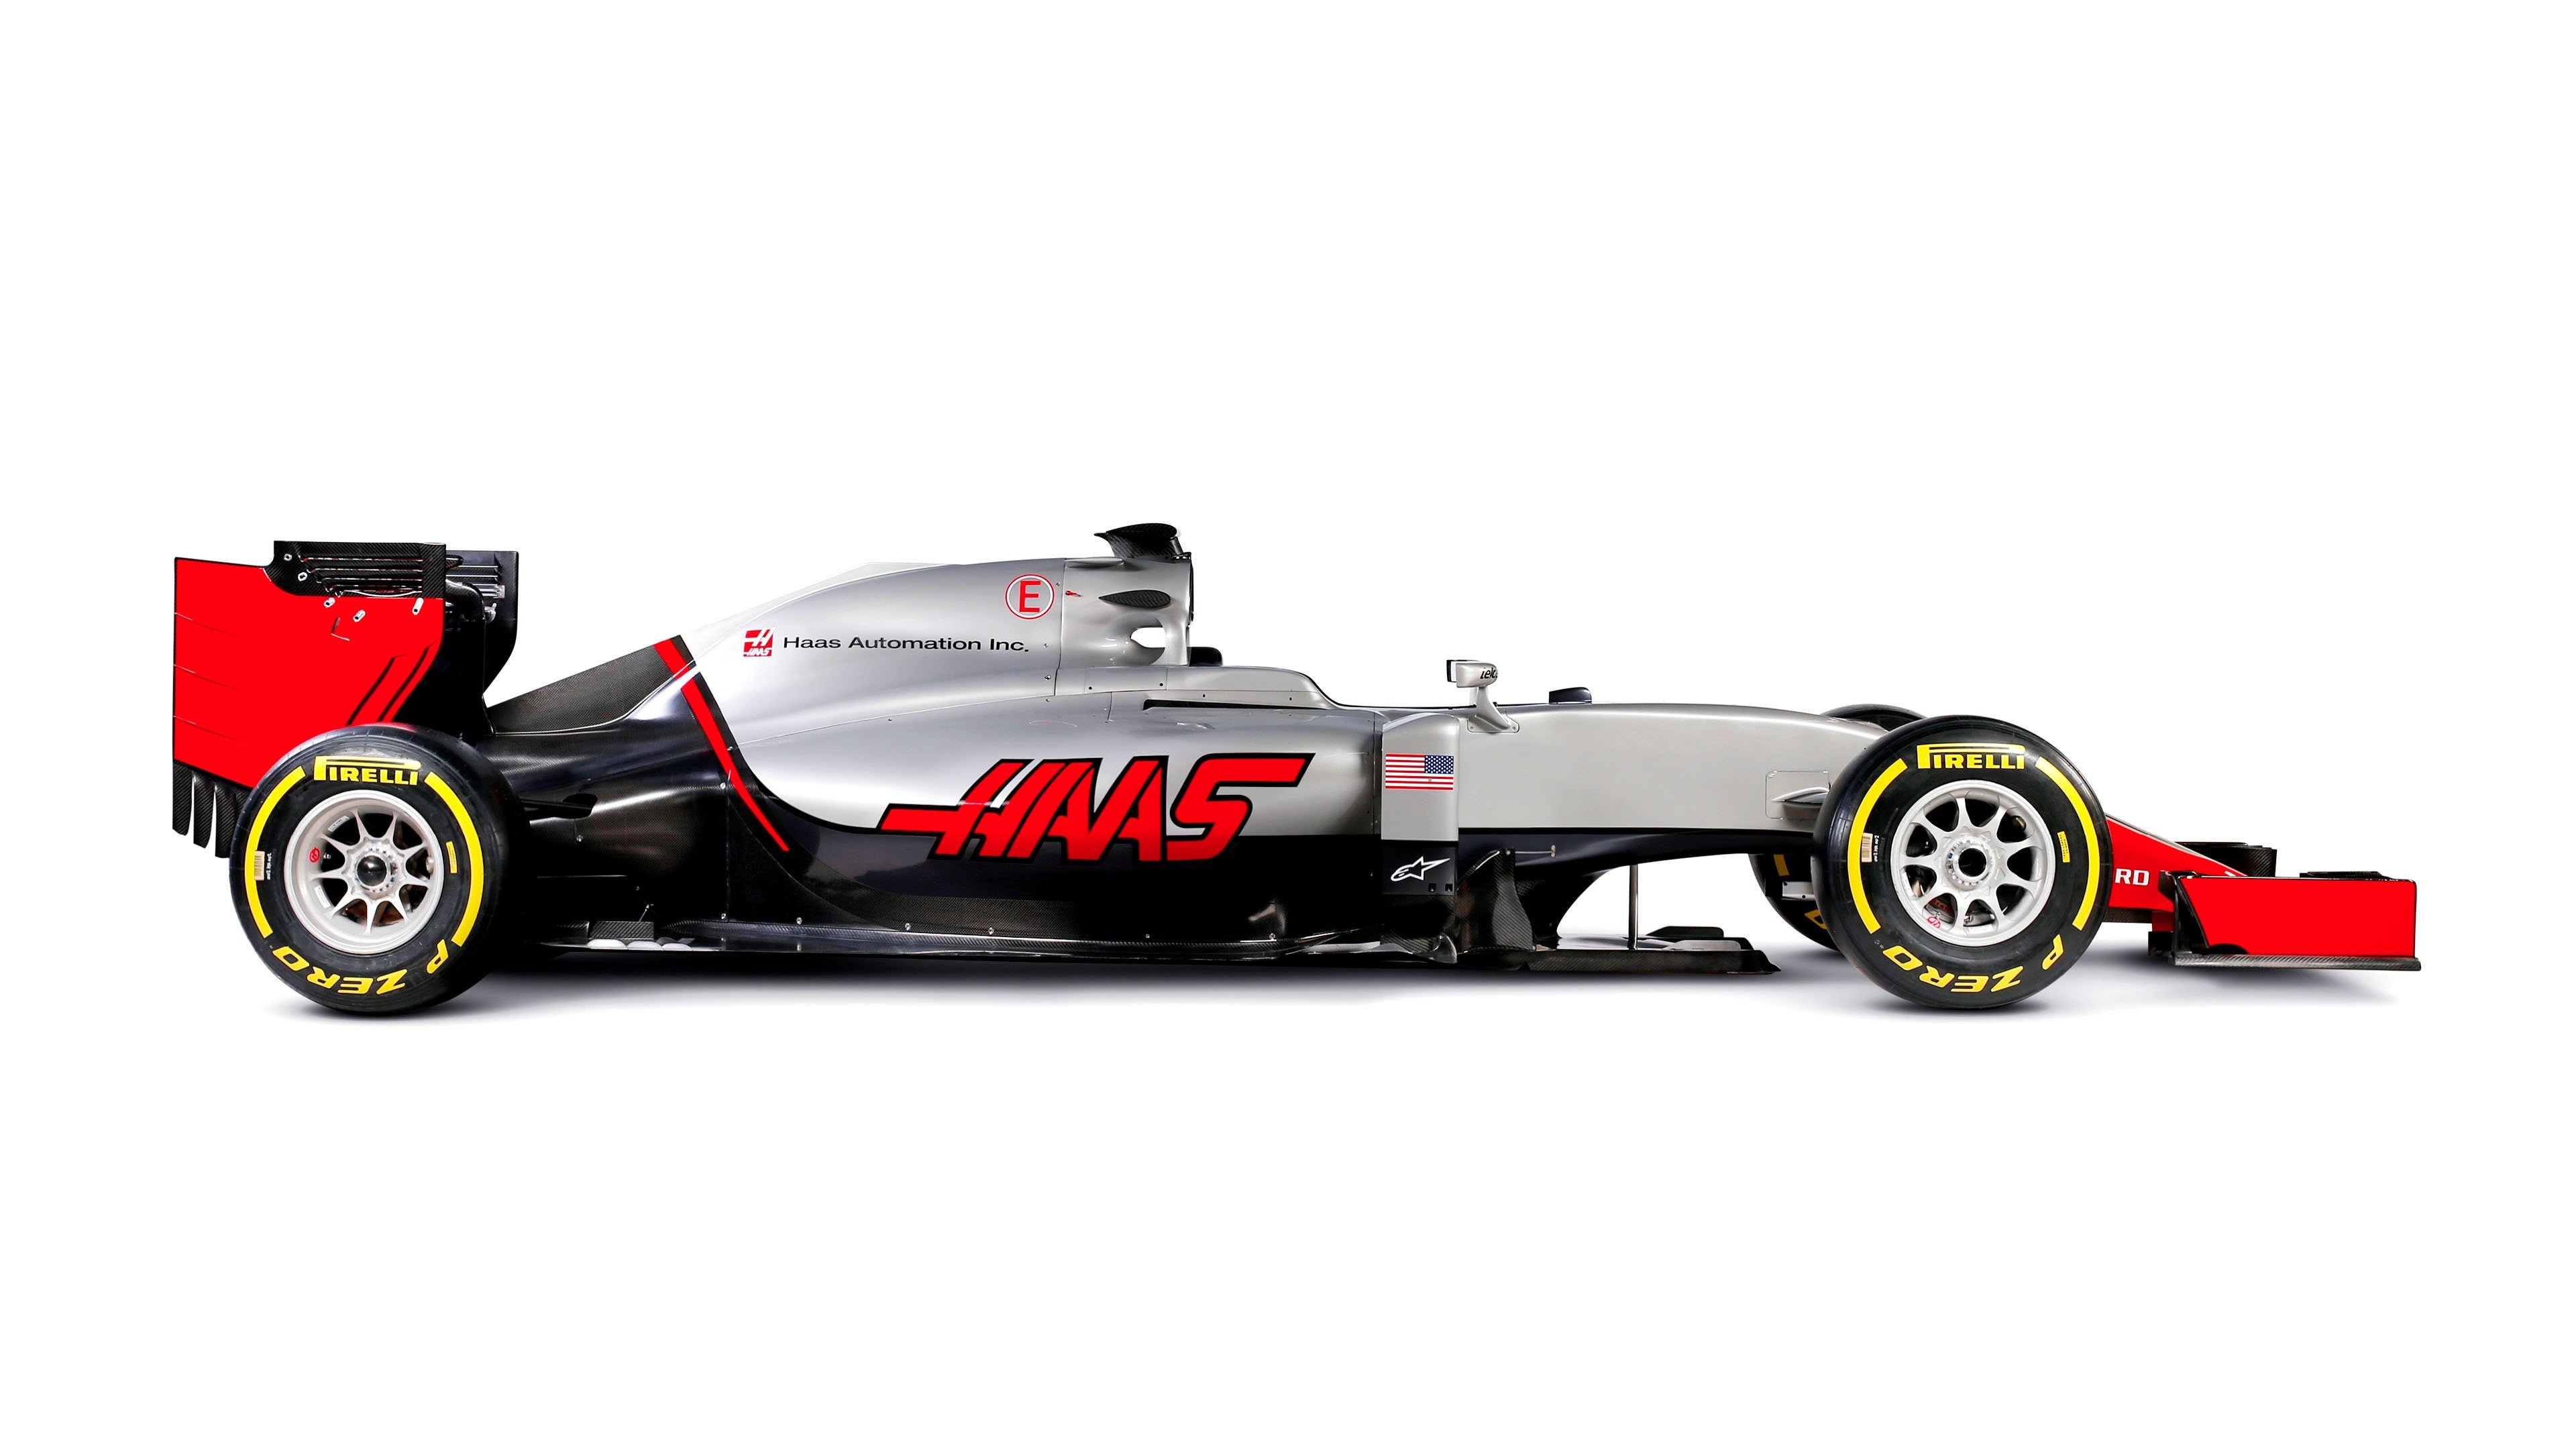 haas, Vf 161, Cars, Racecars, Formula, One, 2016 Wallpapers HD / Desktop and Mobile Backgrounds